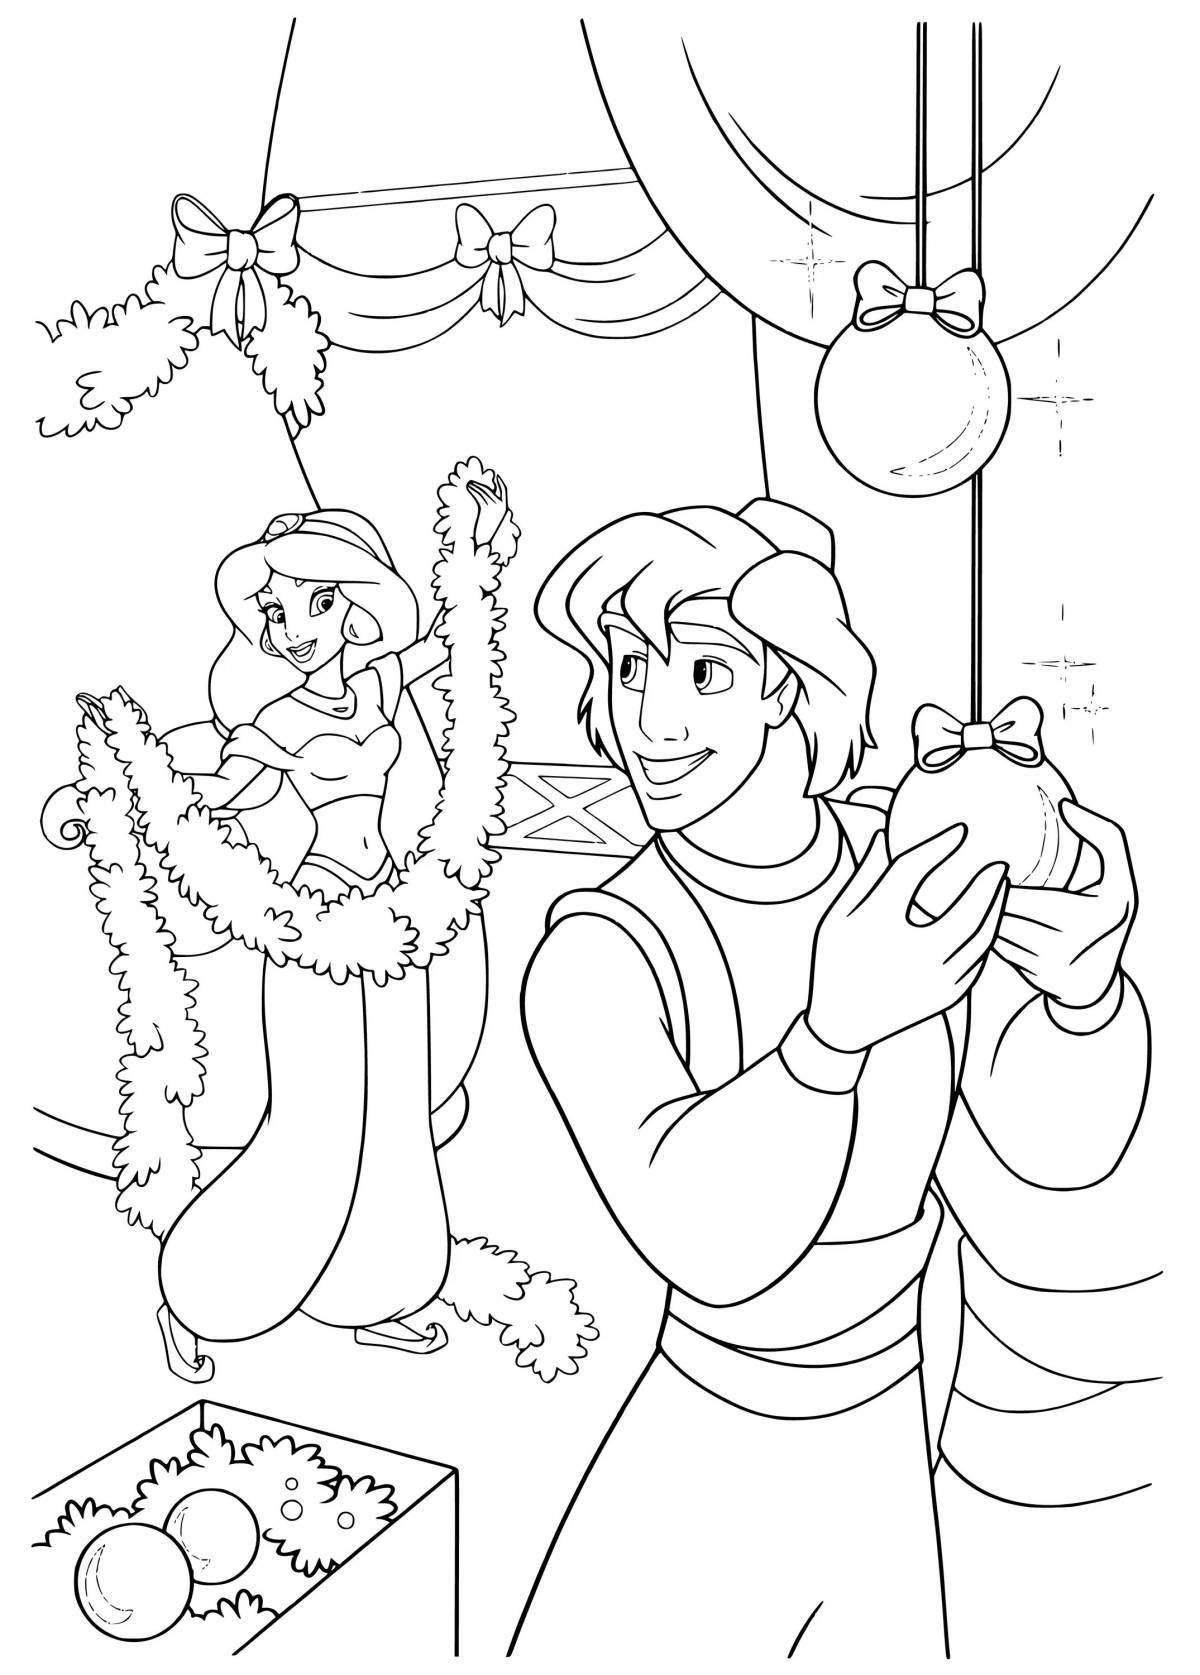 Disney's exquisite Christmas coloring book